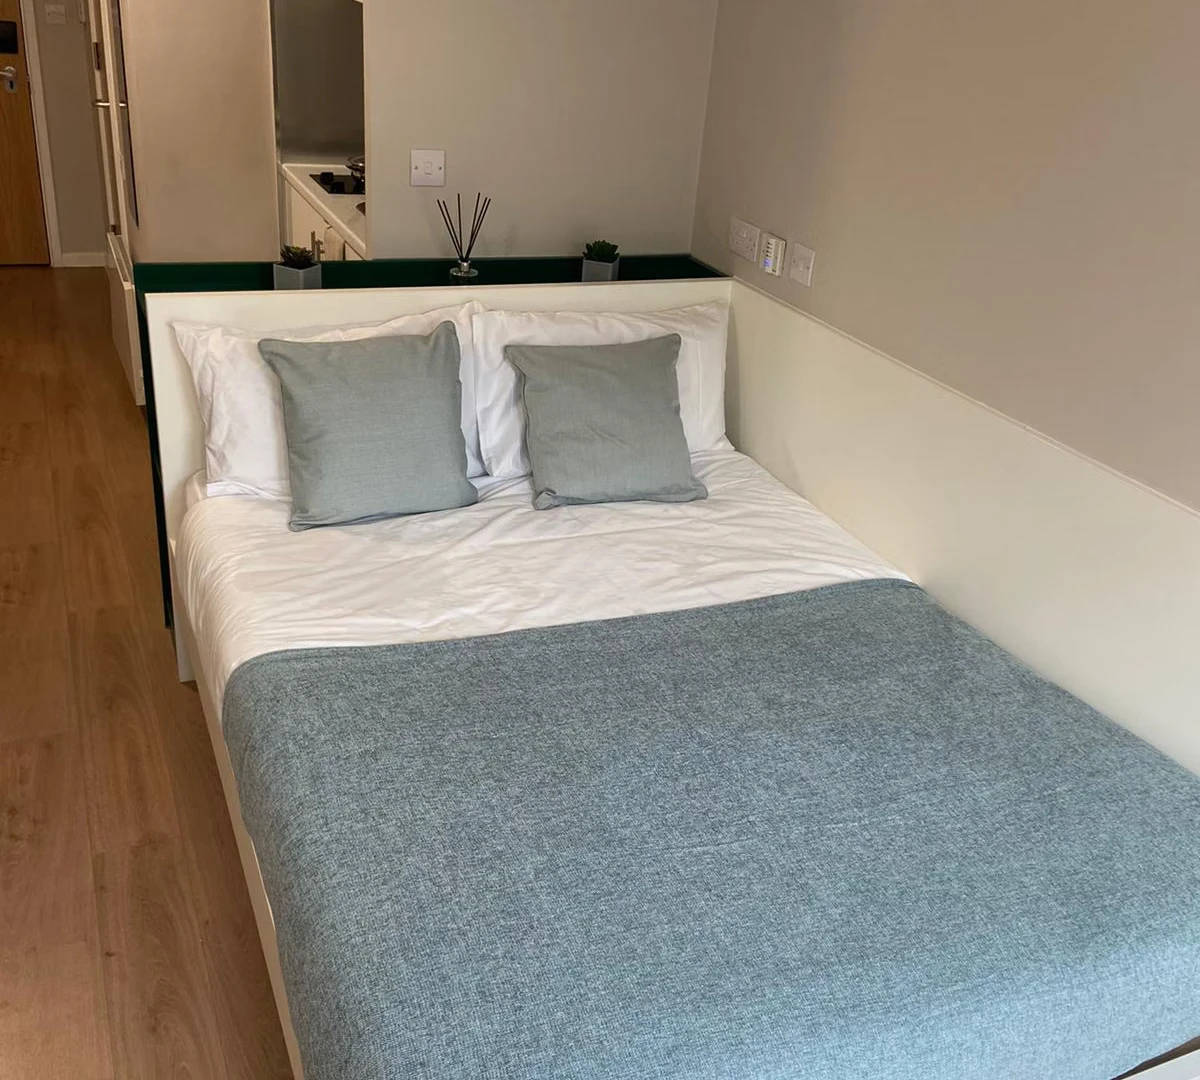 Room for rent in a shared flat in Bath